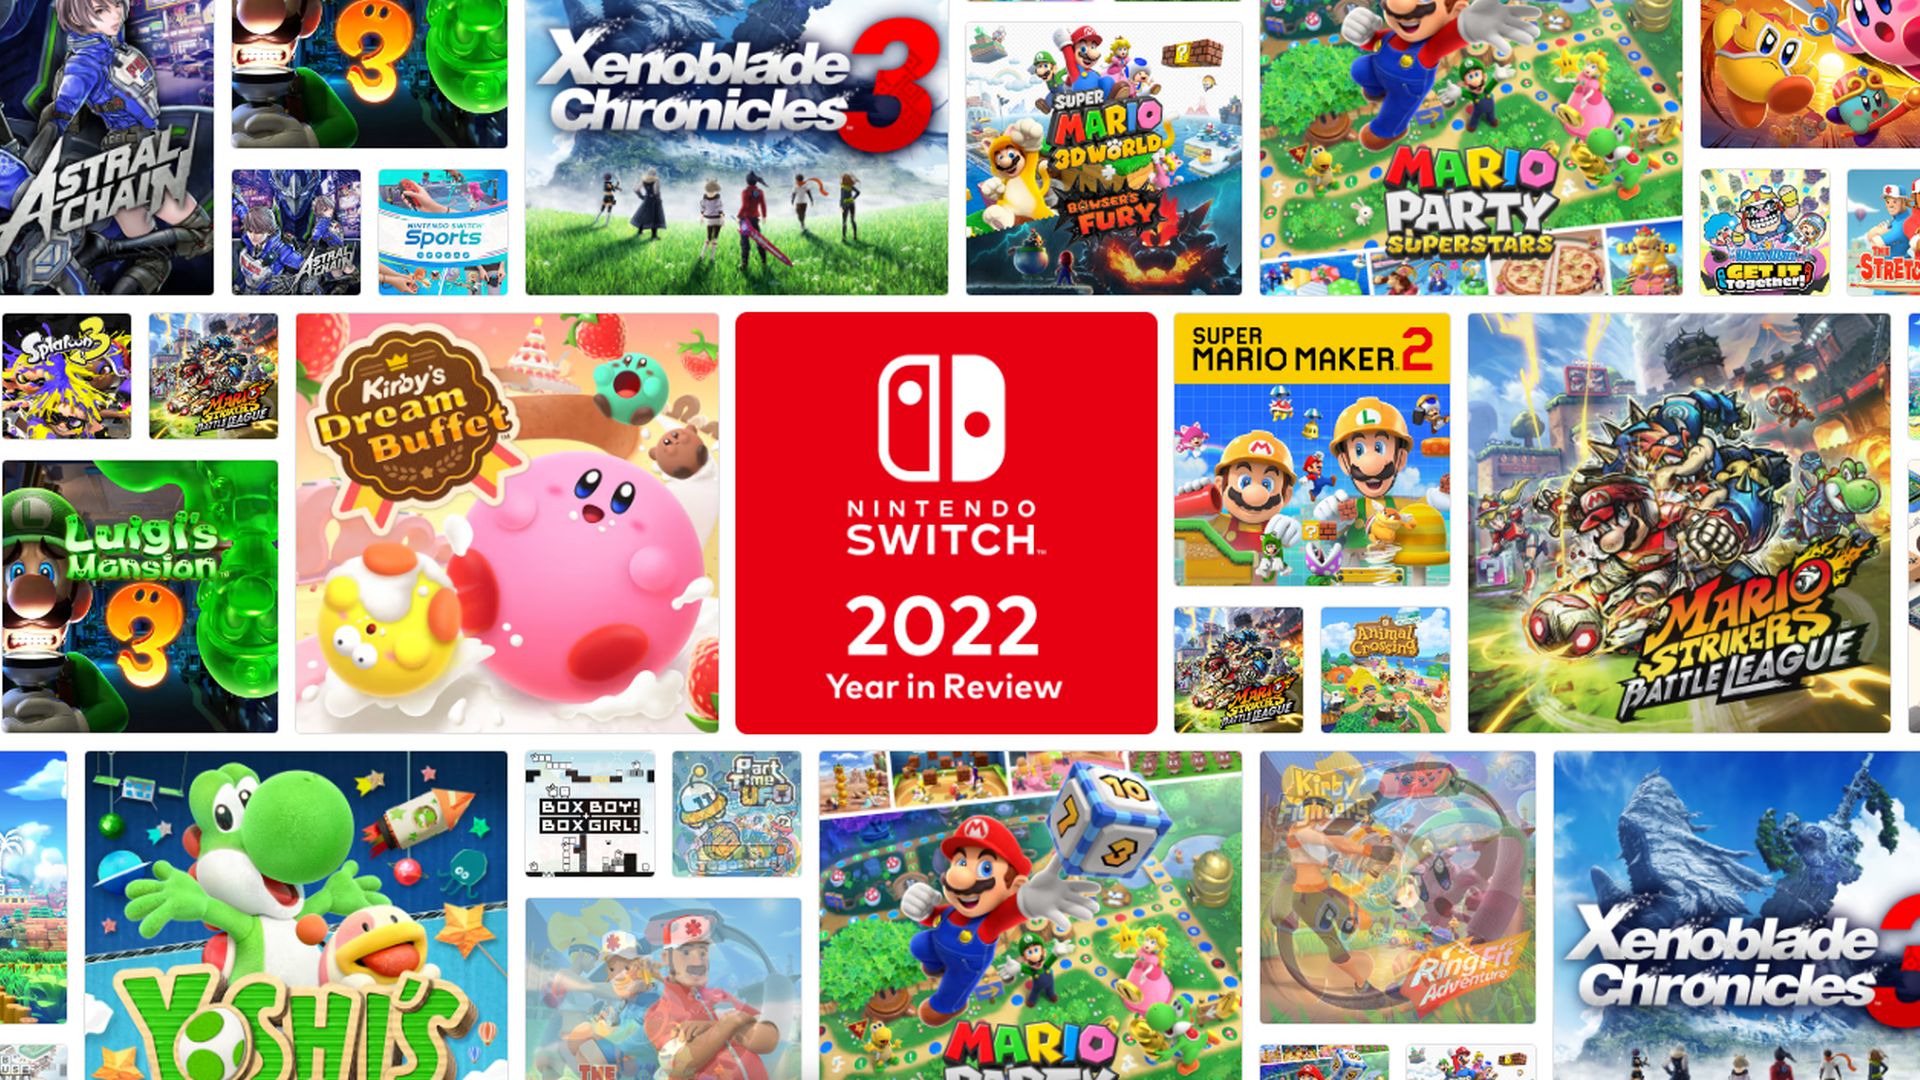 10 great games for your Nintendo Switch from 2022 - The Verge